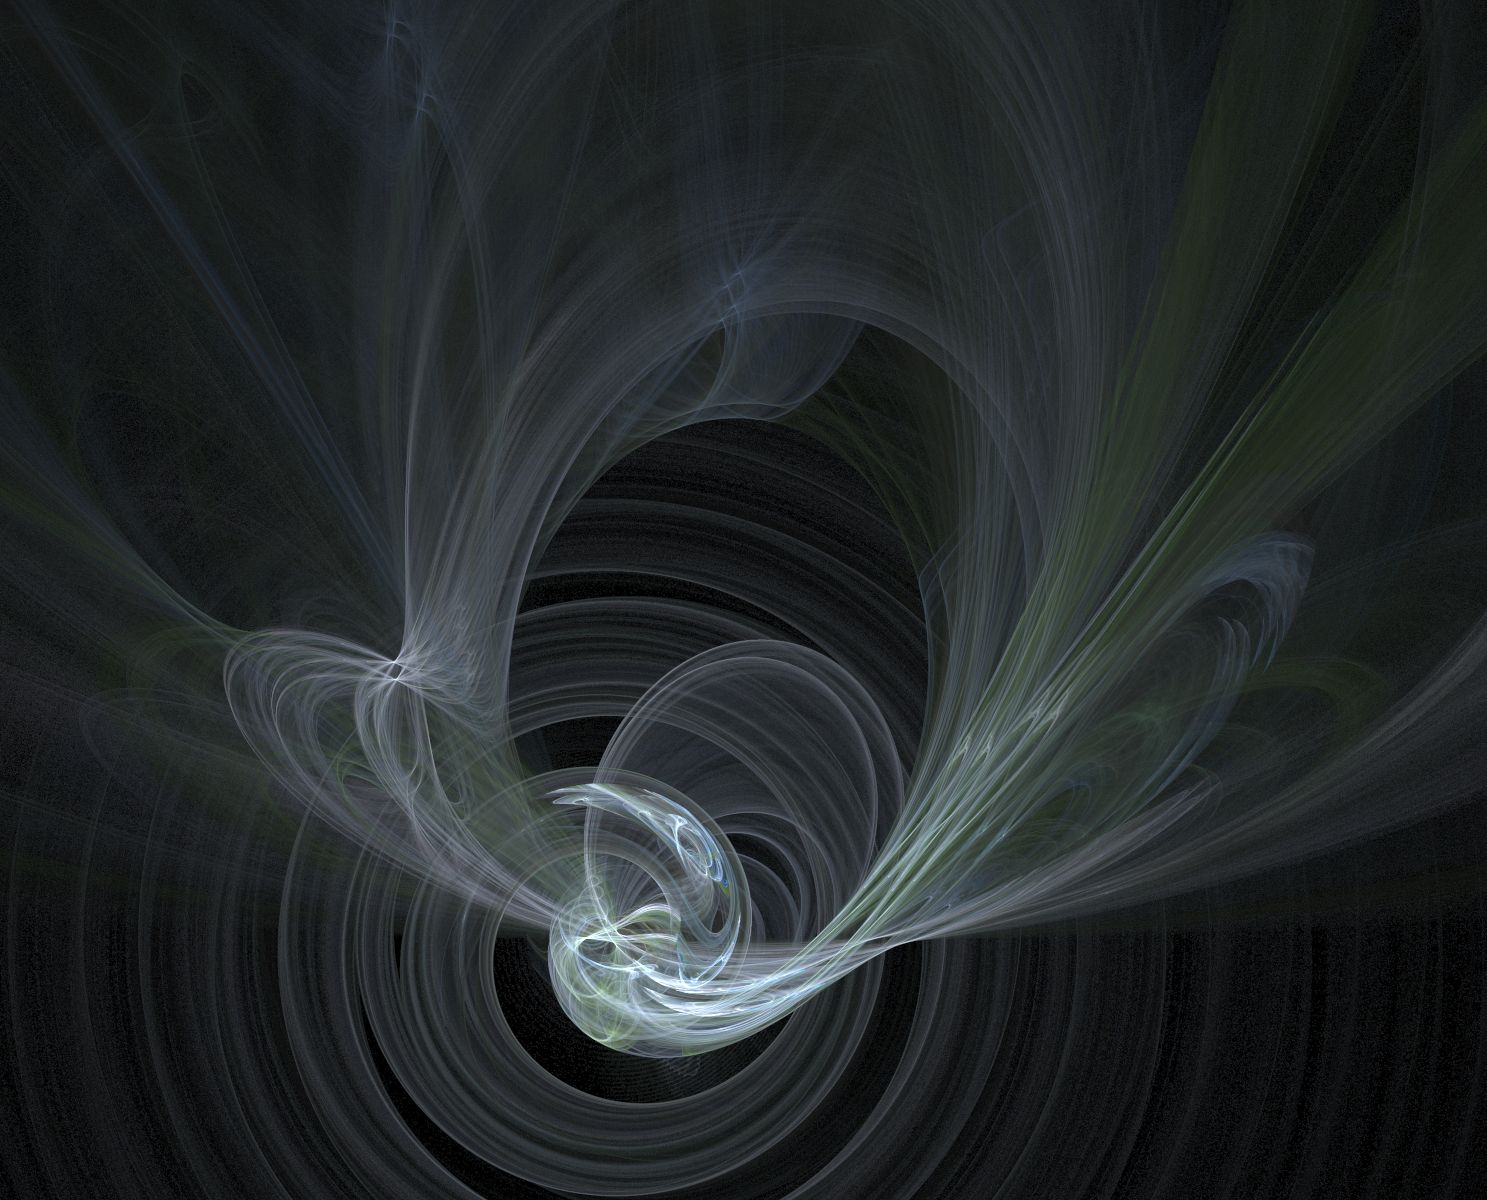 cgi, fractal, abstract images